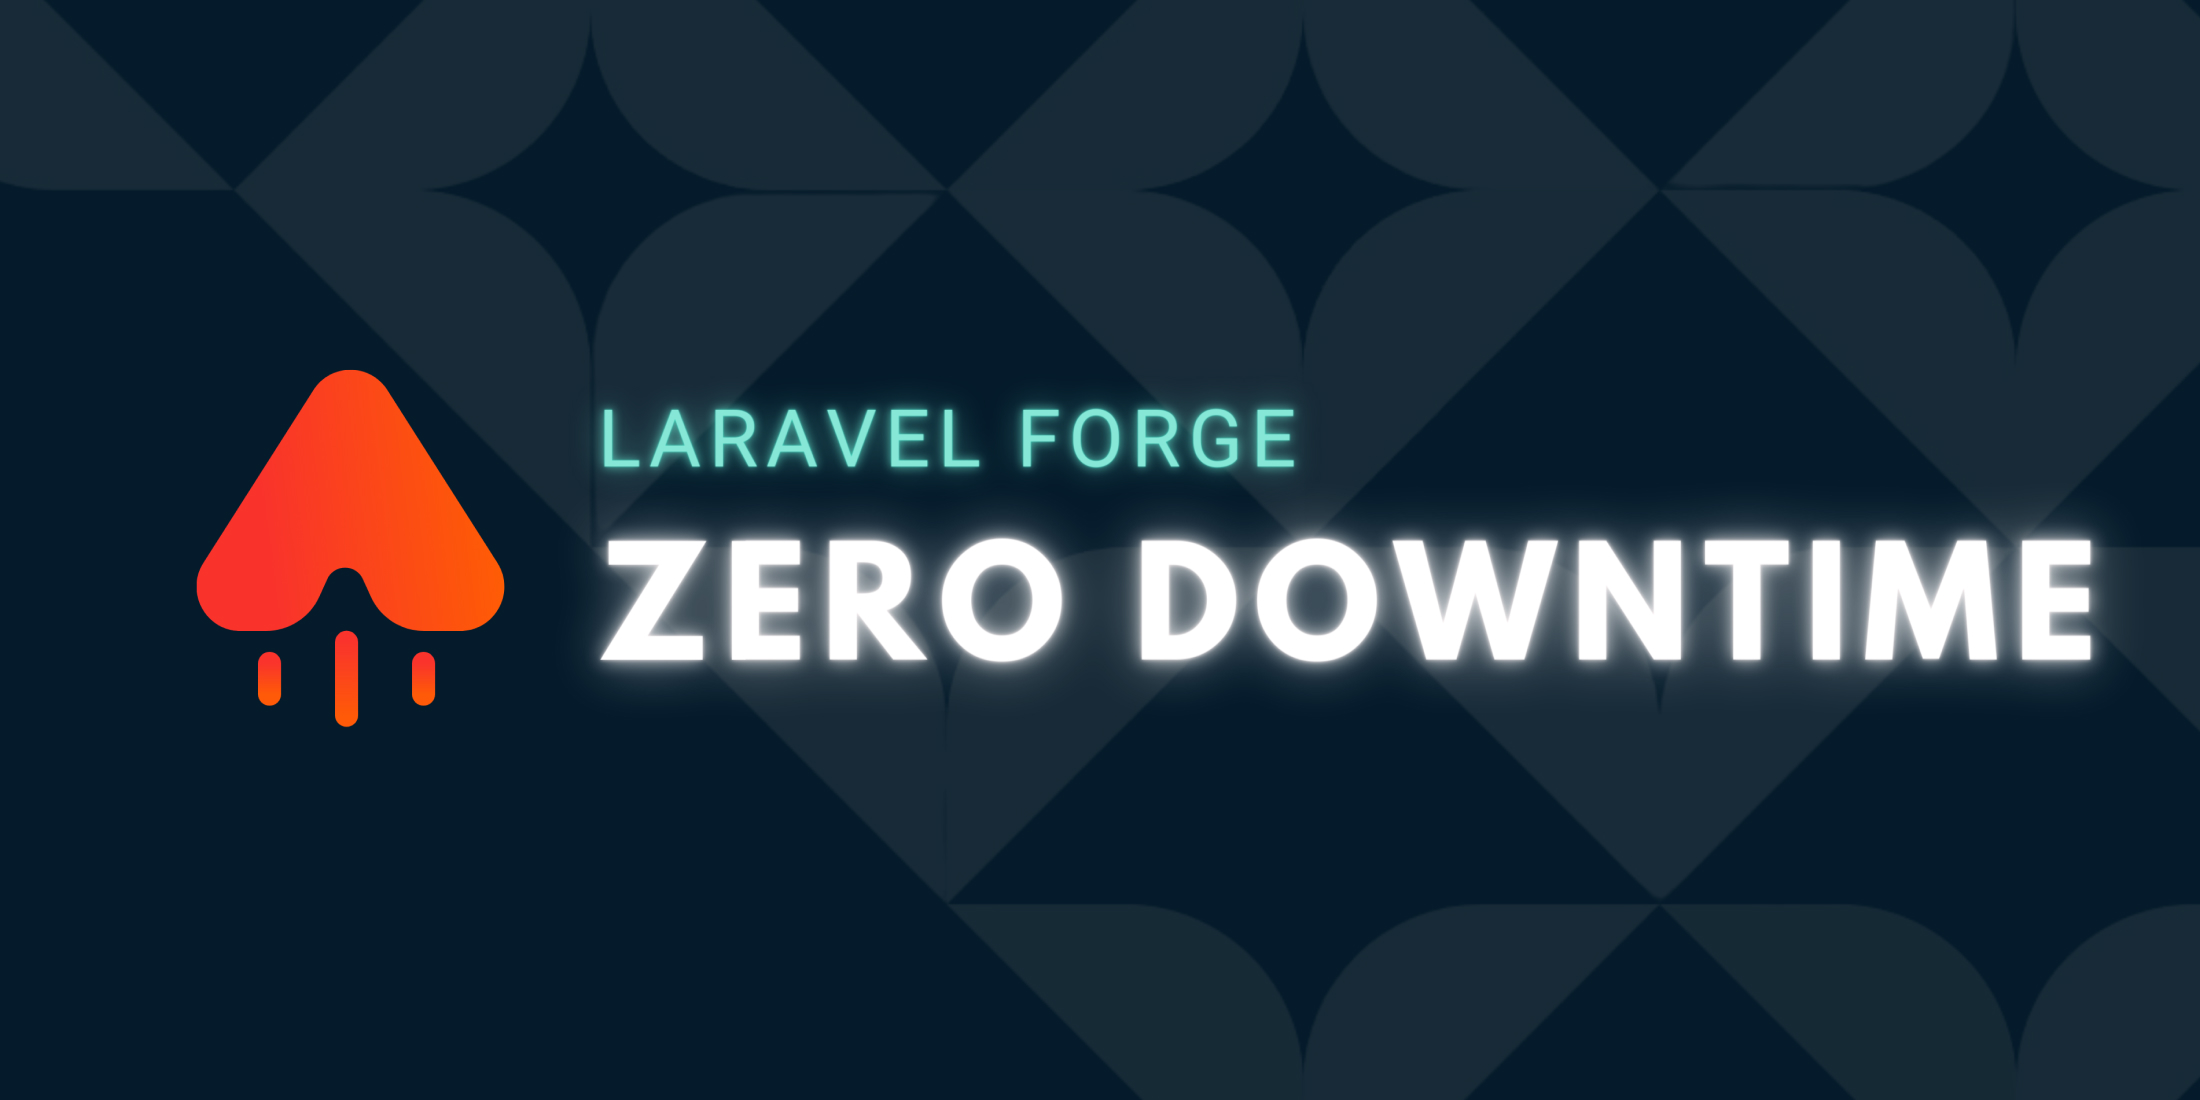 Laravel Forge Introduces Zero Downtime Deployments With Envoyer Integration